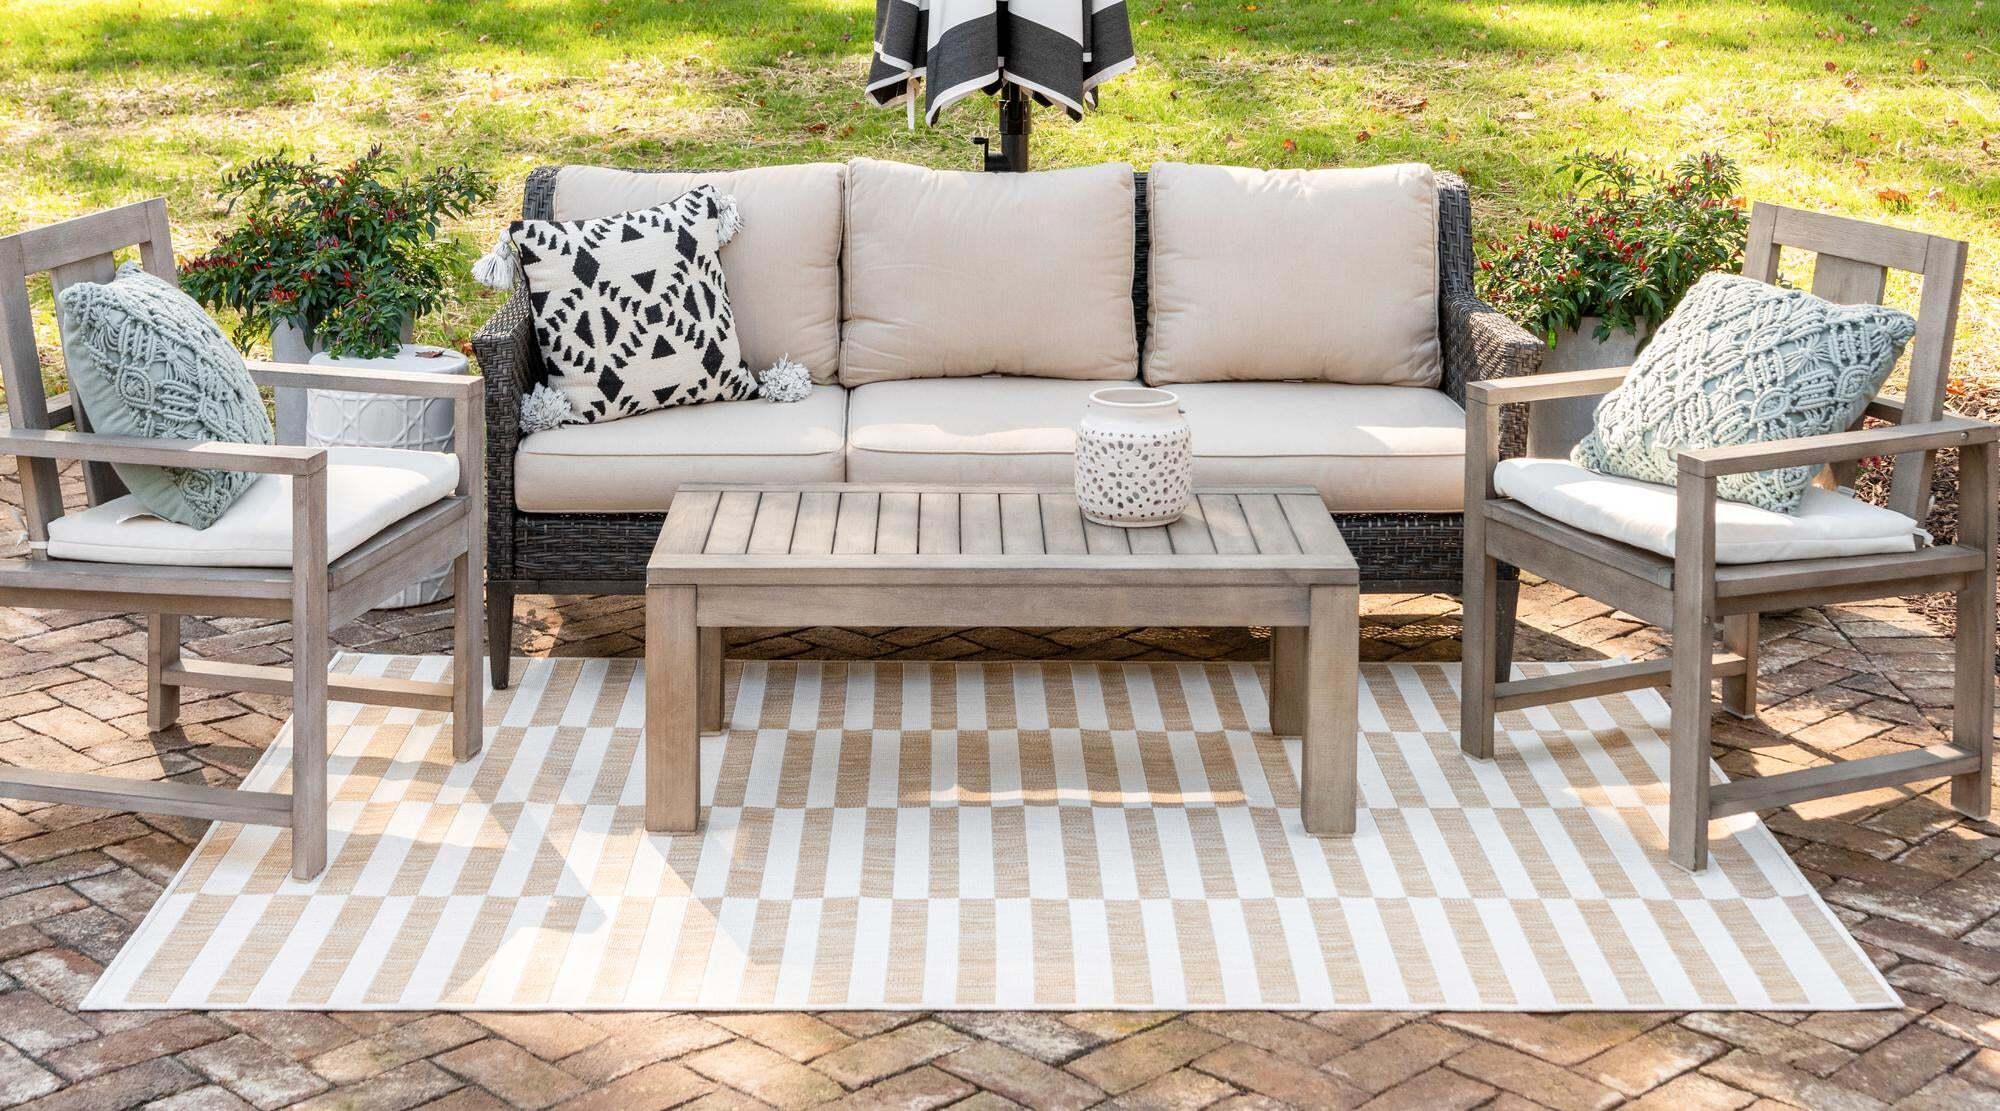 Unique Loom Outdoor Rugs - Outdoor Striped Geometric Rectangular 9x12 Rug Light Brown & Ivory